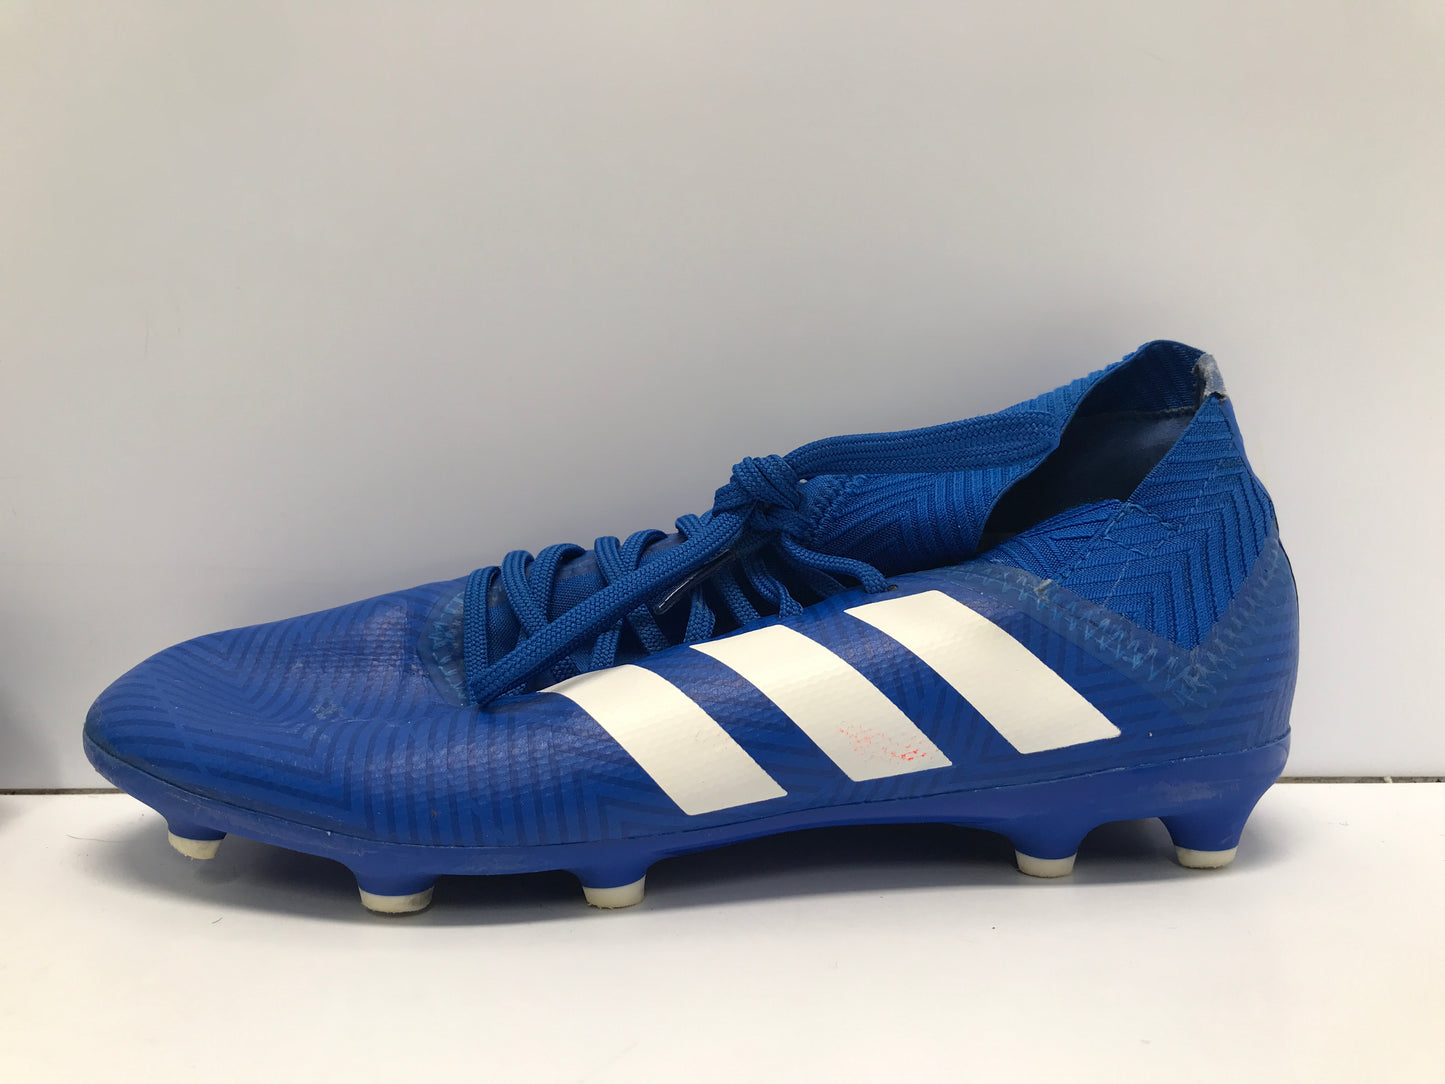 Soccer Shoes Cleats Child Size 3 Adidas Nemesis Blue White Slipper Foot